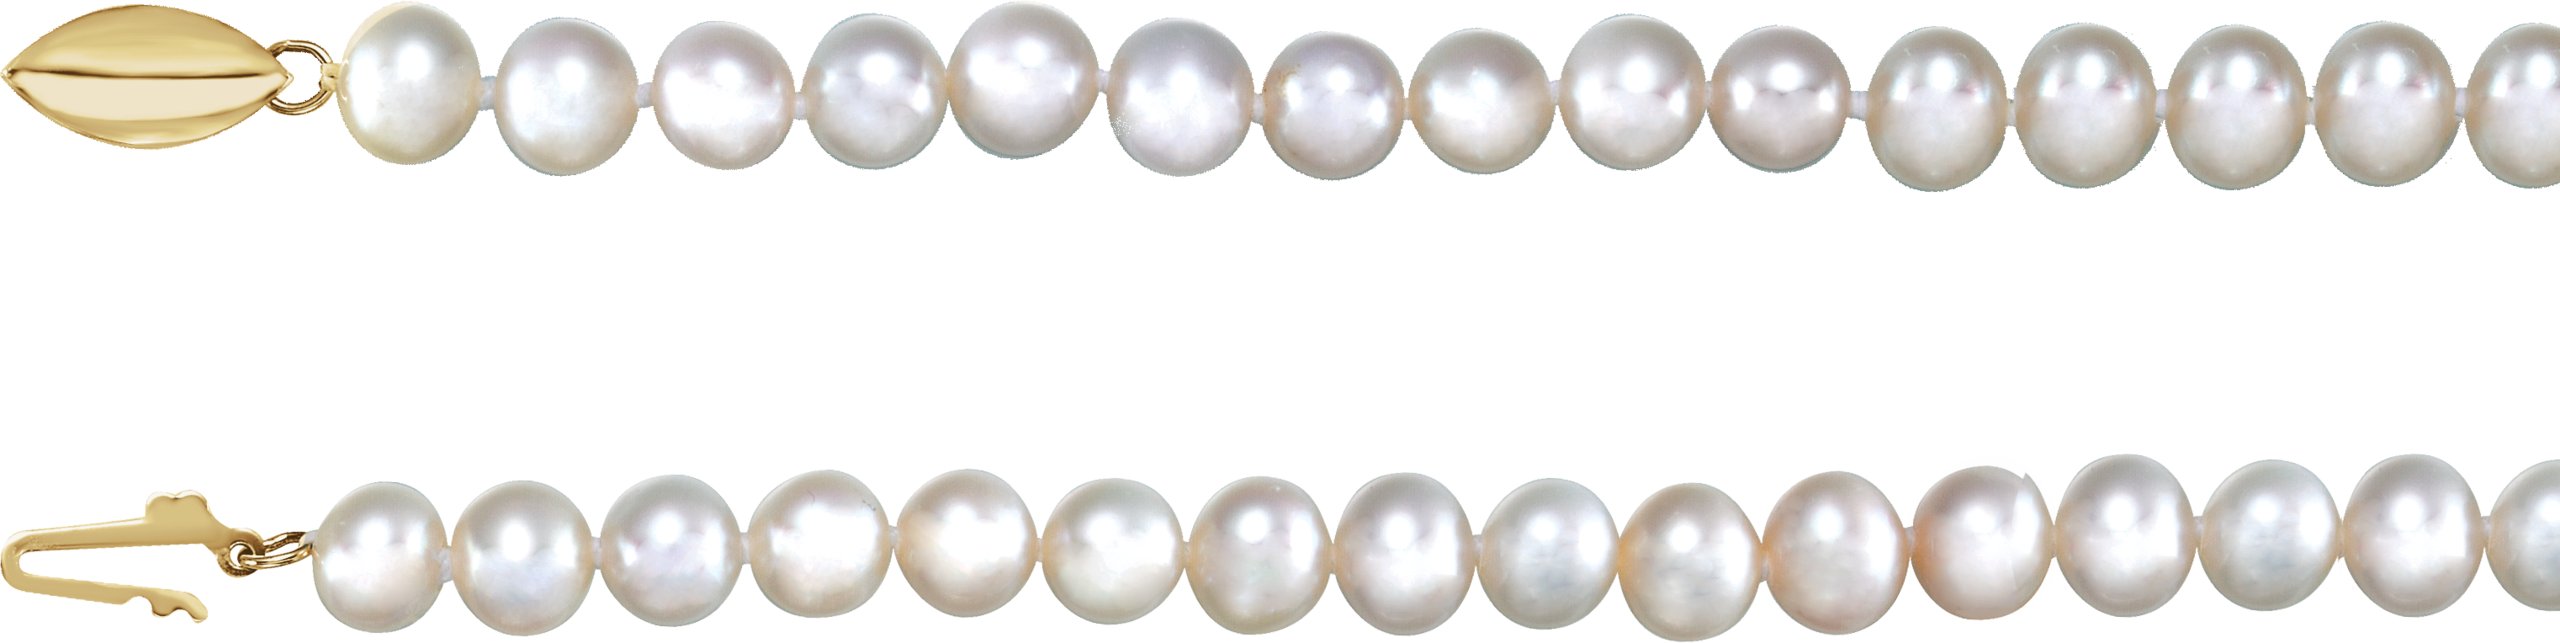 Panache Freshwater Cultured Pearl Strand 18 inch 5 to 5.5mm Ref 659195